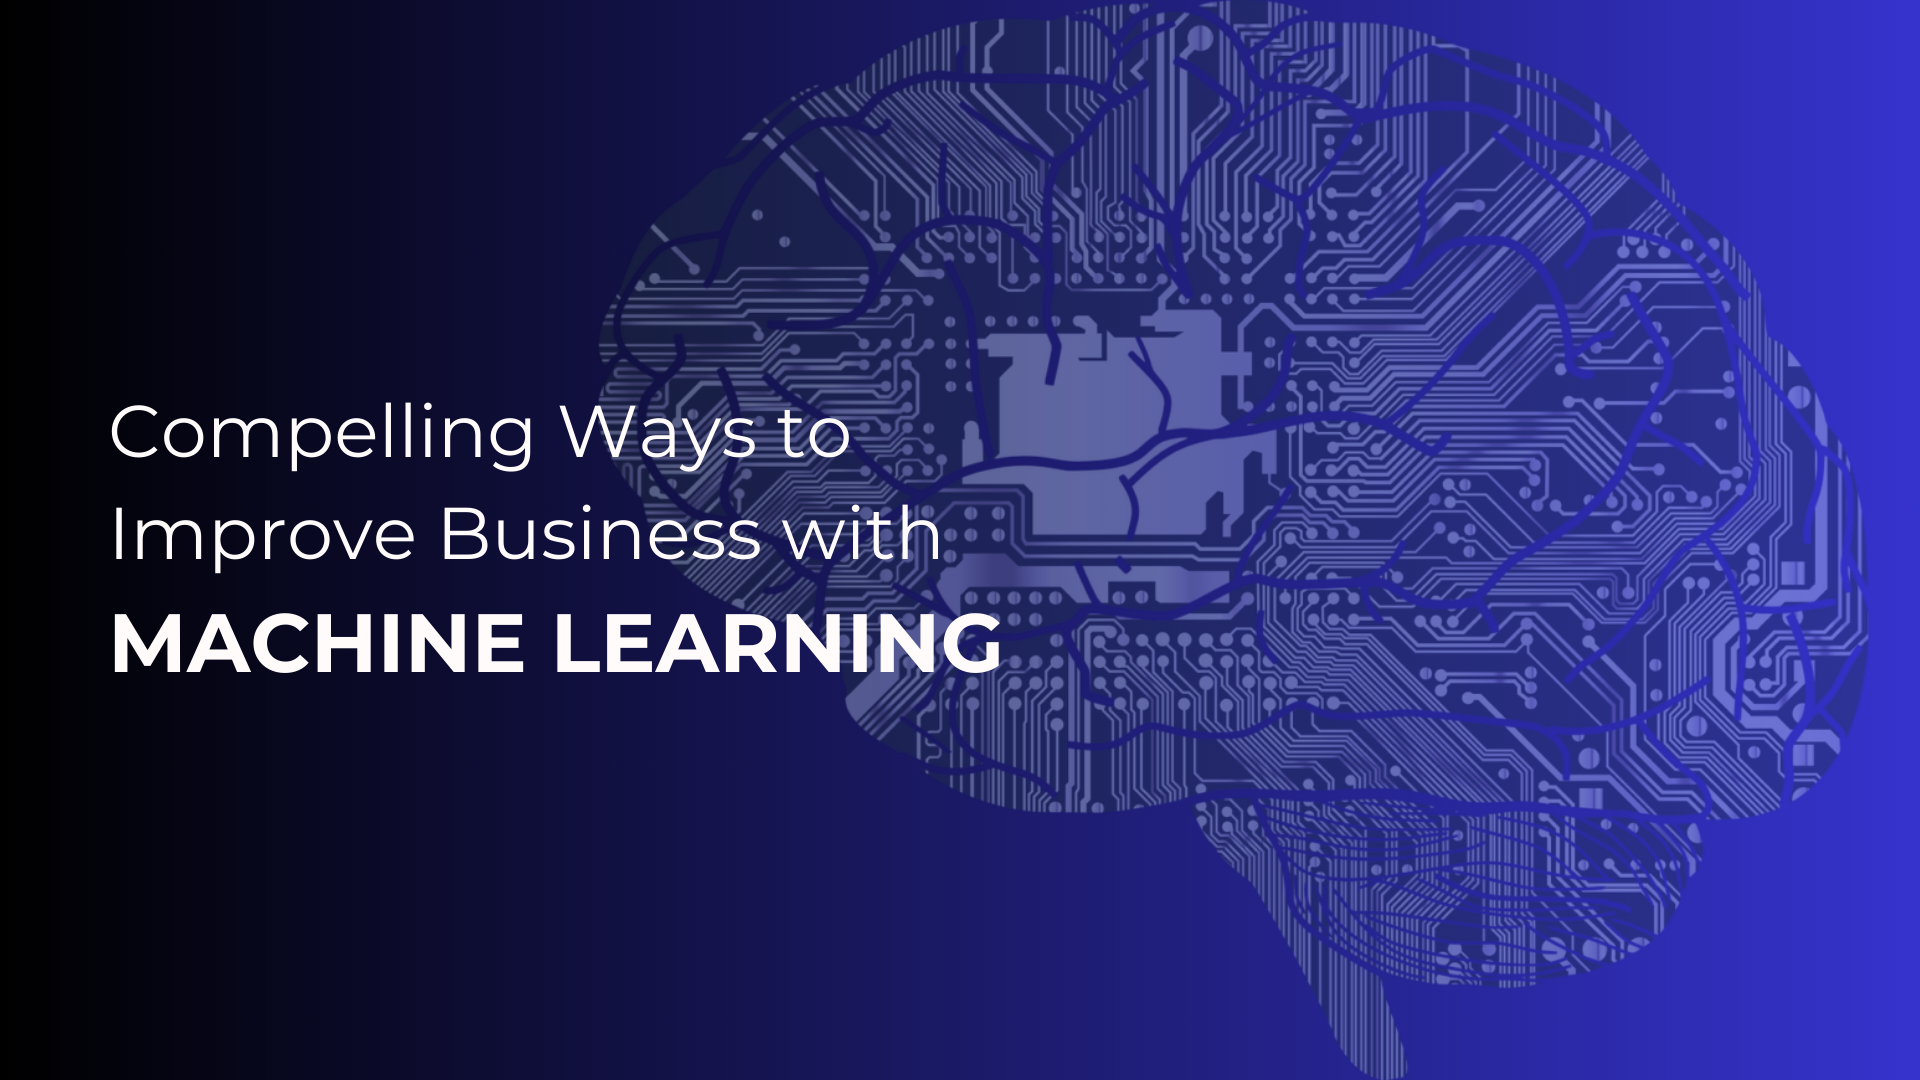 How to Use Machine Learning to Improve Business